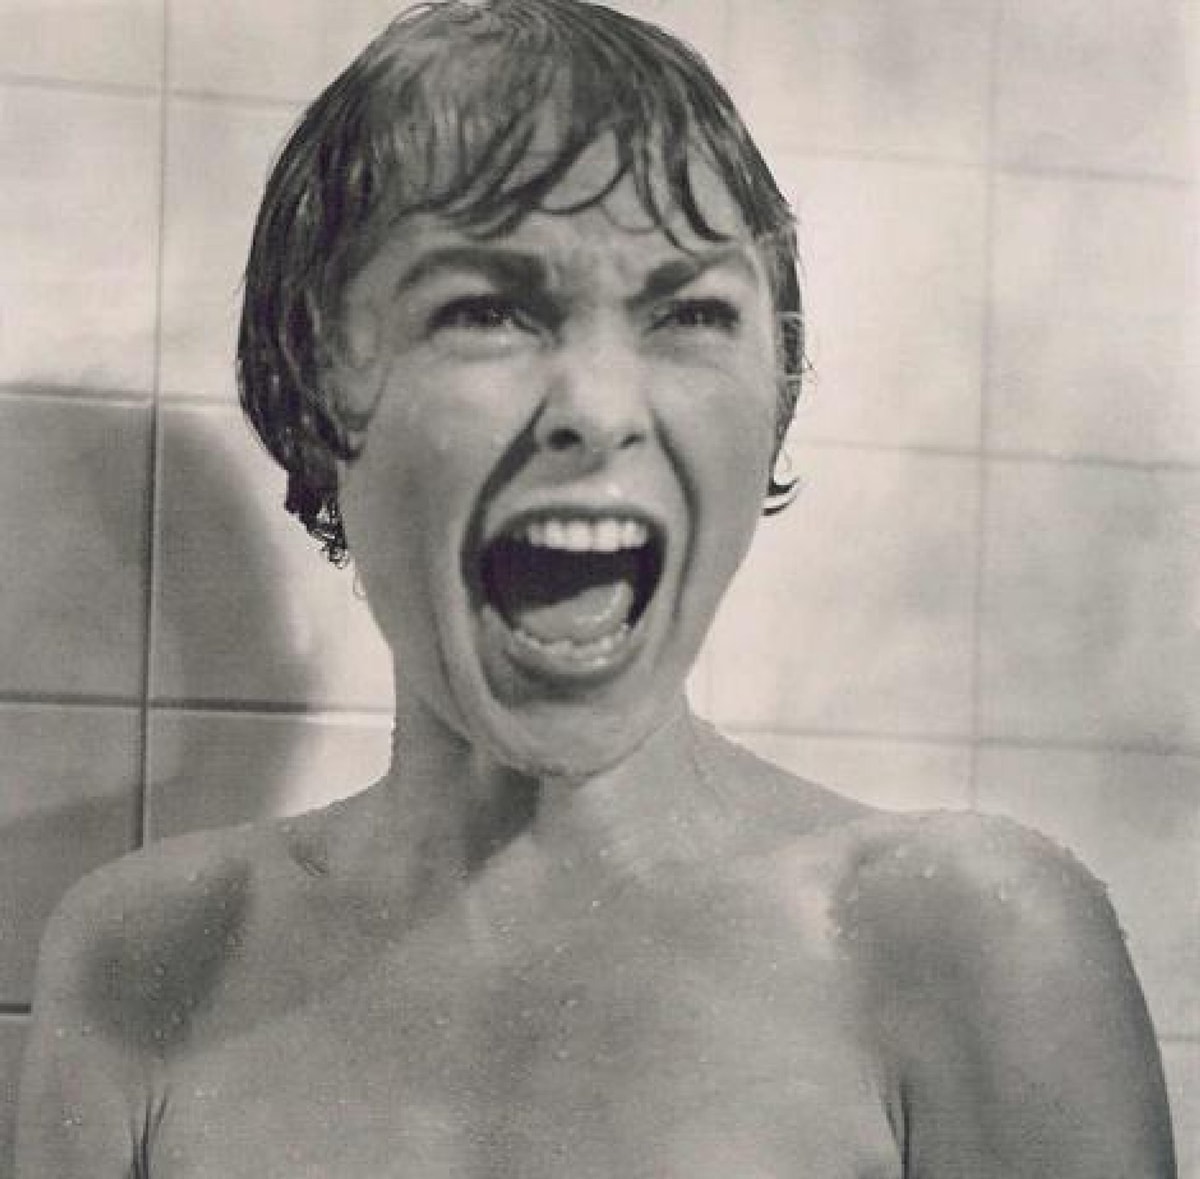 Janet Leigh starred as Marion Crane in Alfred Hitchcock's 1960 American psychological horror-thriller film Psycho